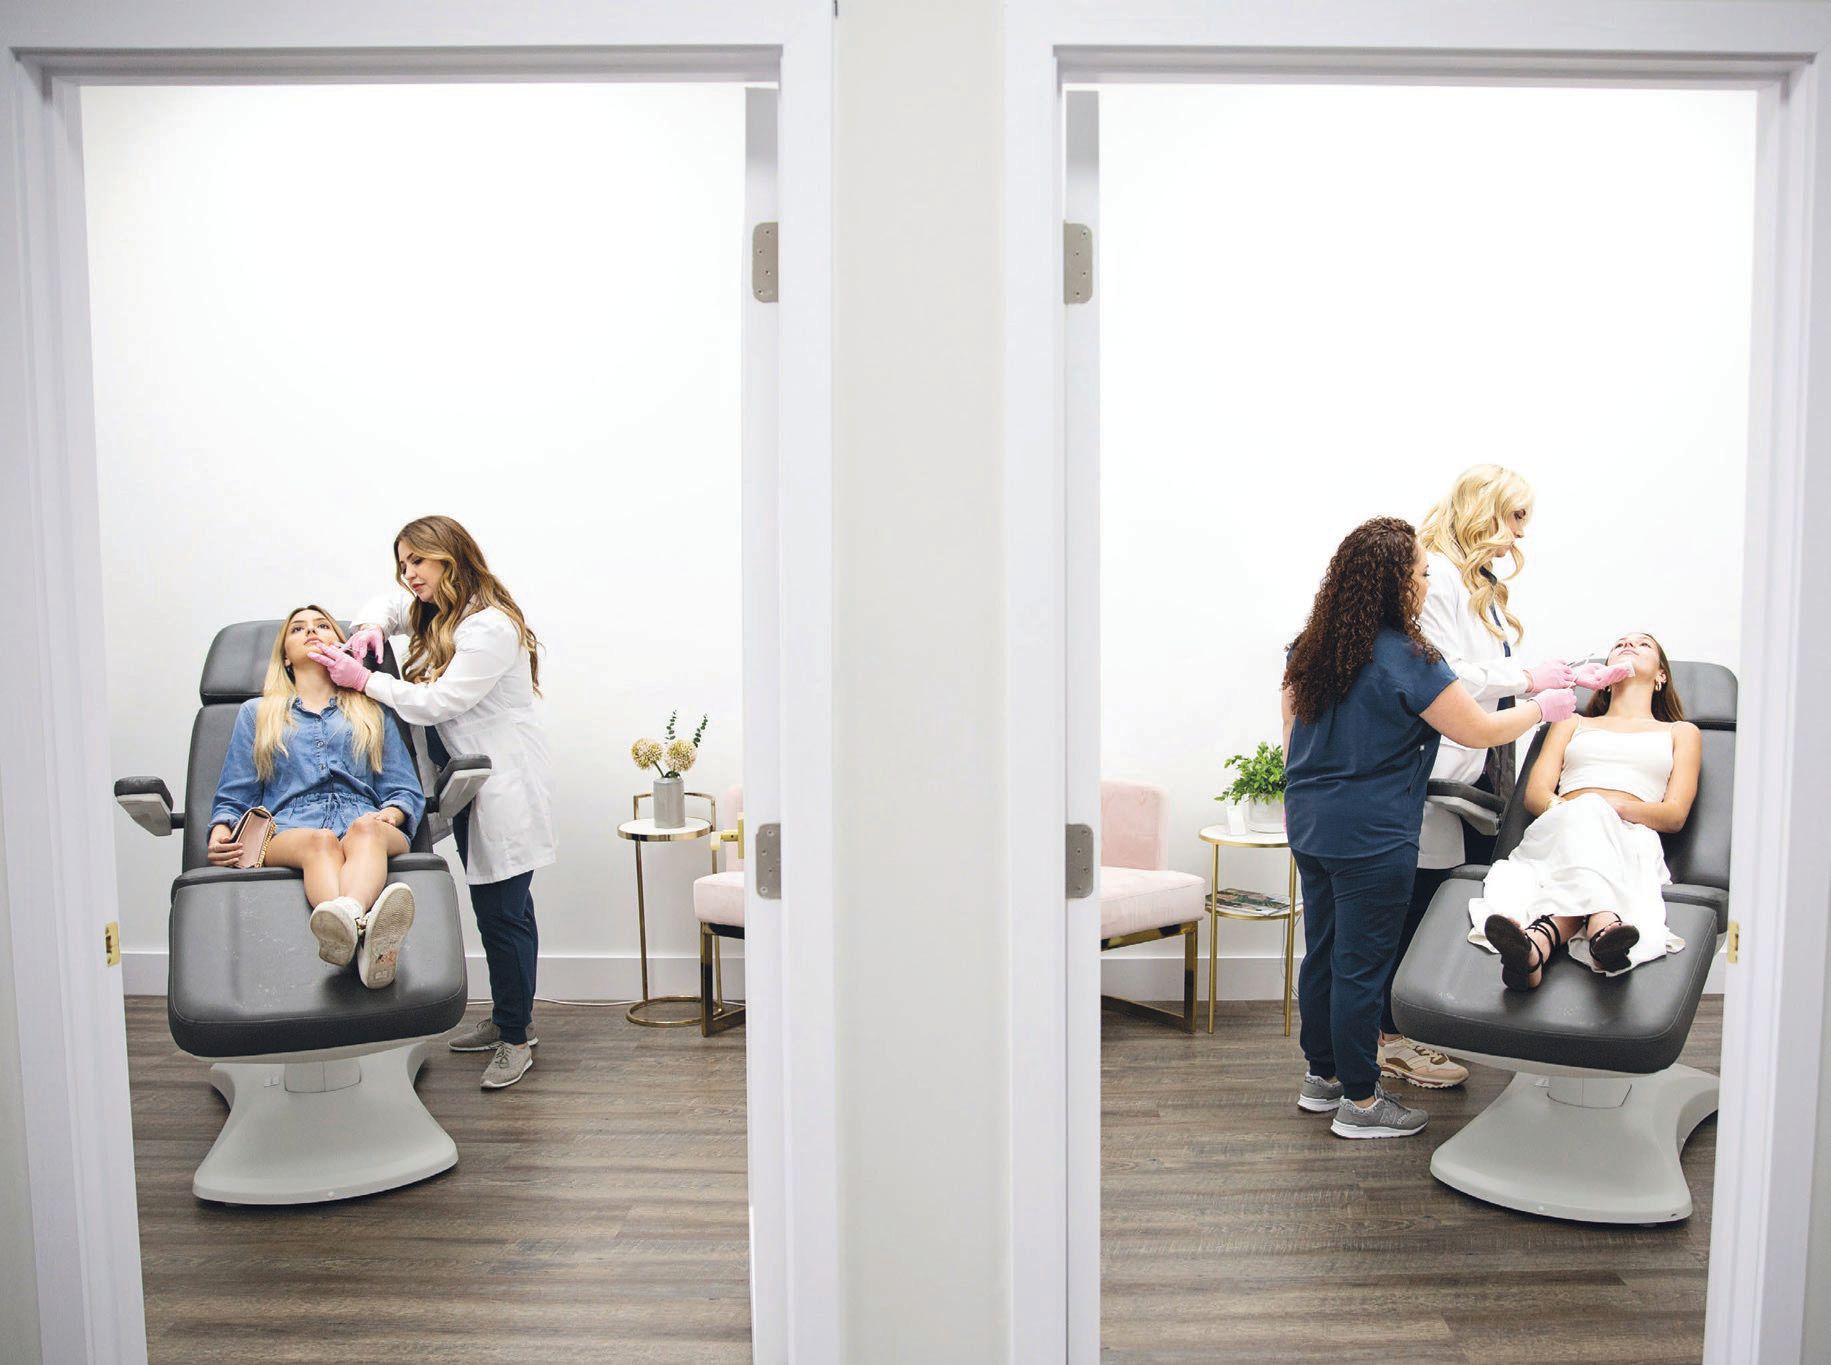 SkinLocal’s boutique-style clinic offers a warm welcome to those seeking a go-to spot for exclusive cosmetic treatments. PHOTO BY SUNA PHOTOGRAPHY